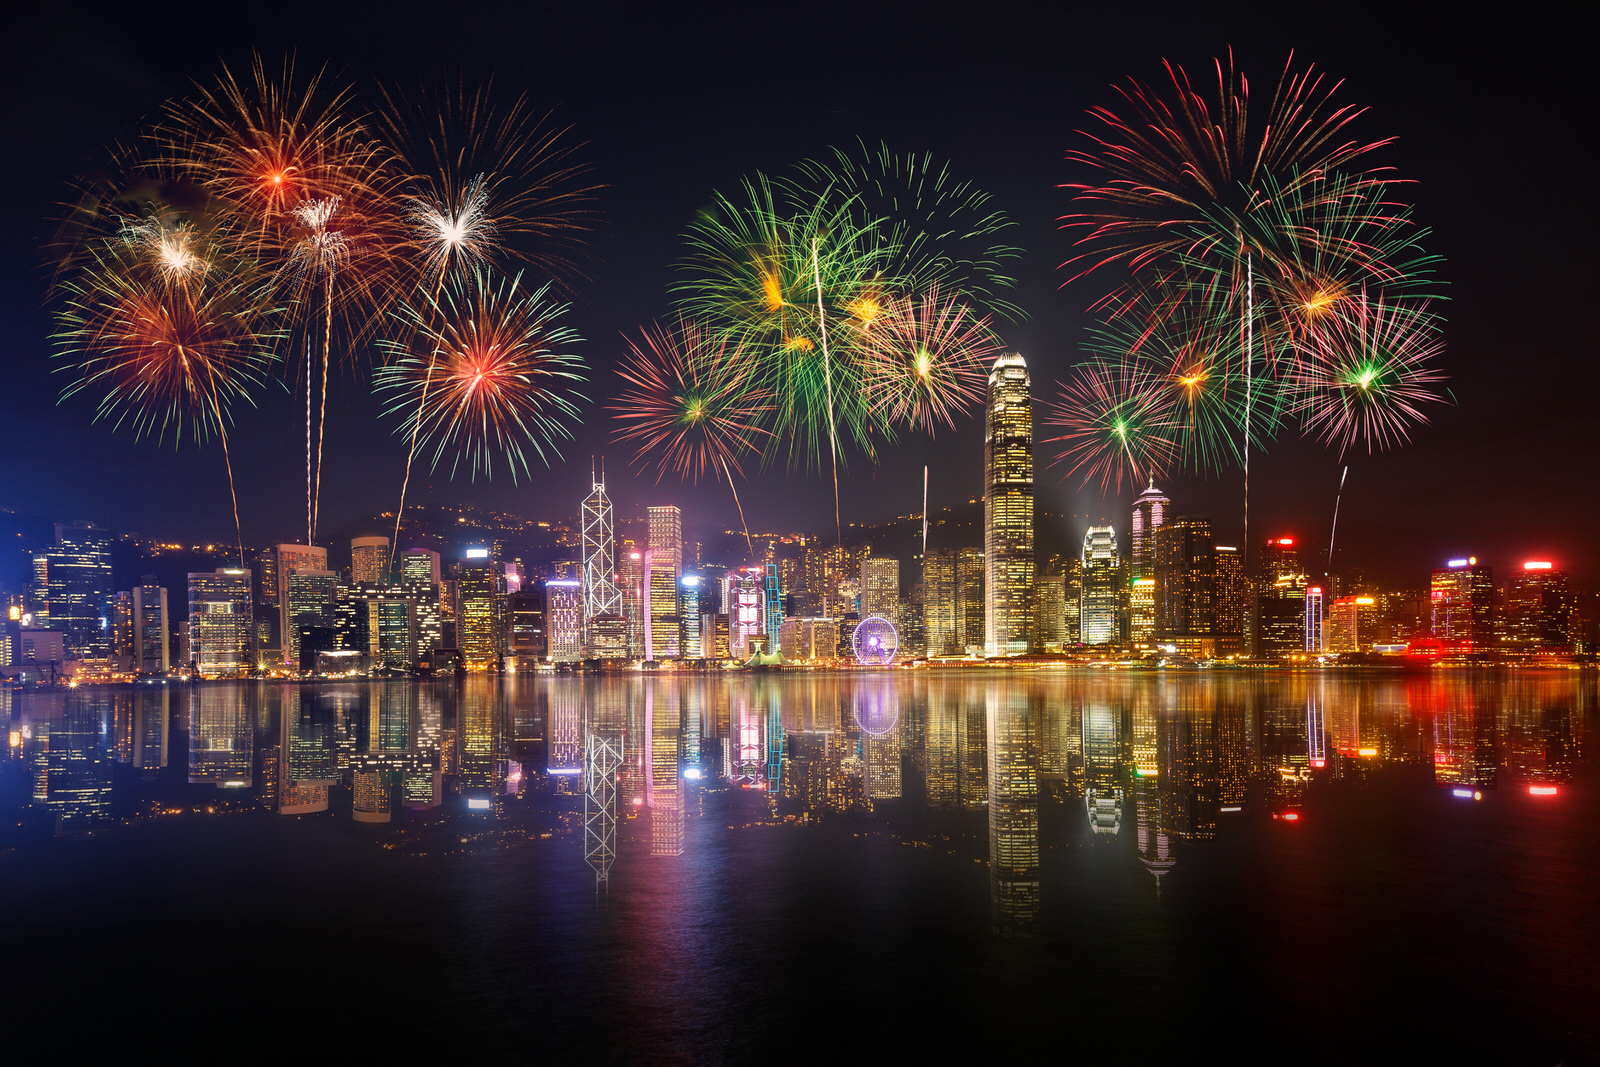 Fireworks light up the night sky above Hong Kong harbour as part of the celebrations for Chinese New Year